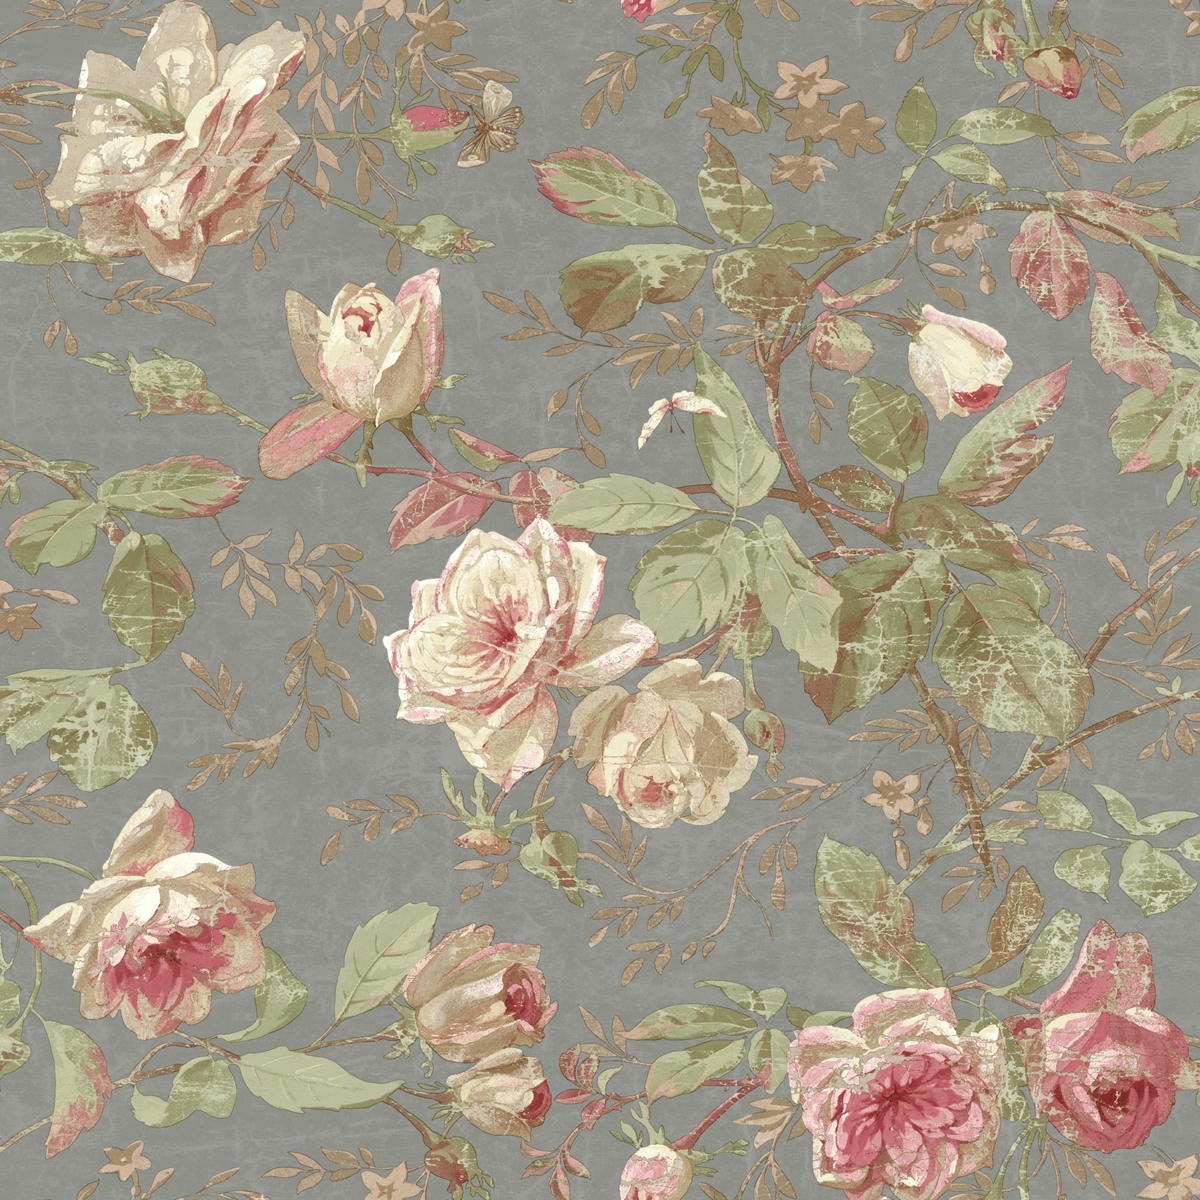 Vintage Floral Wallpaper |Wallpaper And Borders |The Mural Store